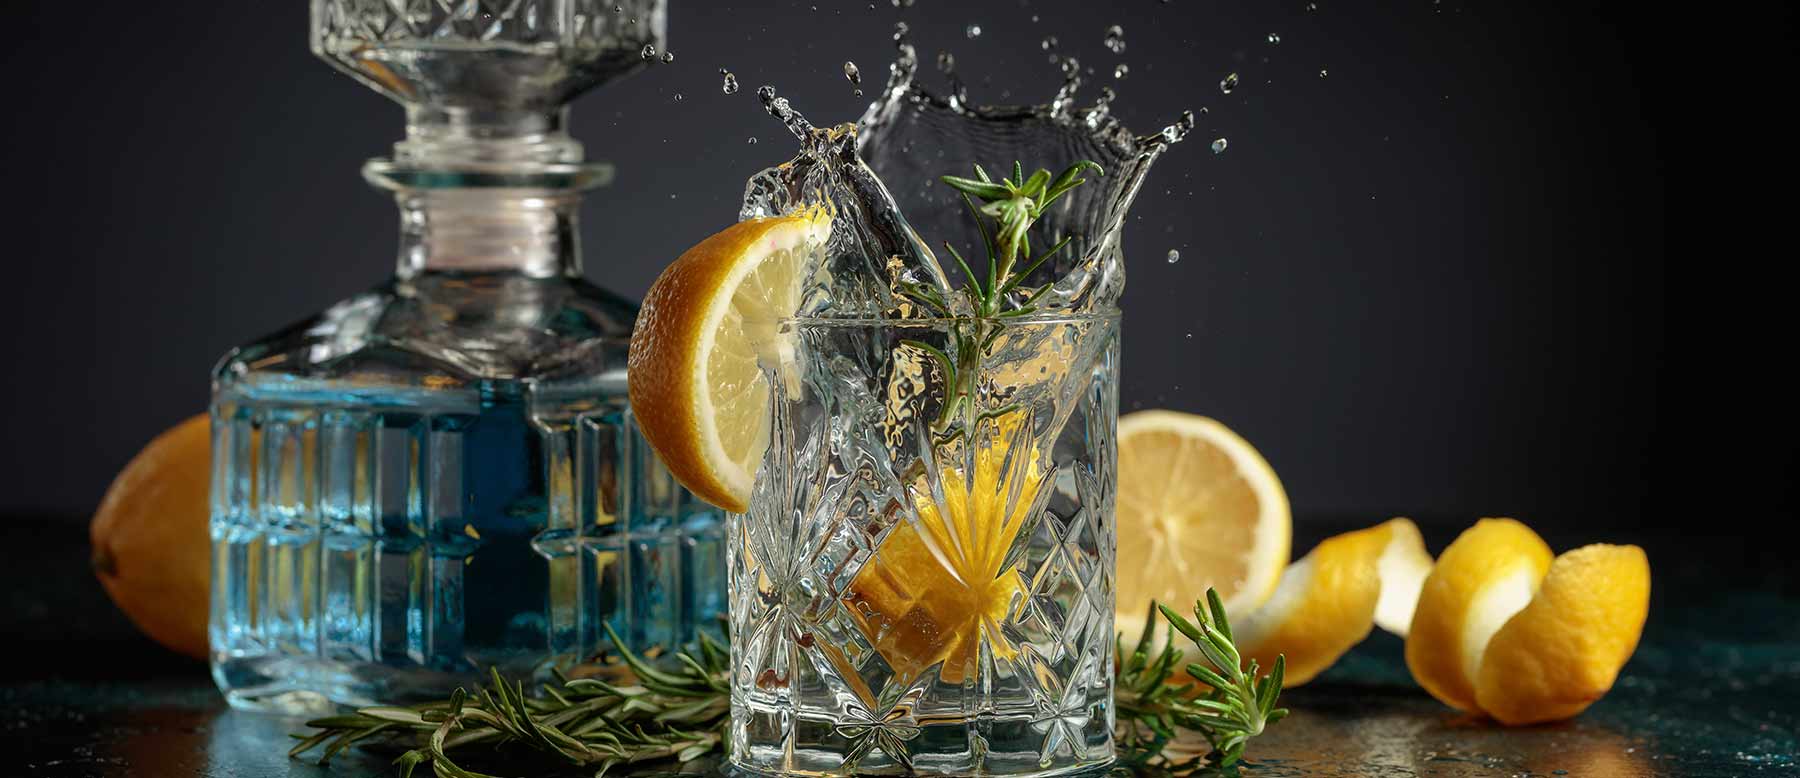 All about the most expensive gins: types, brands and prices